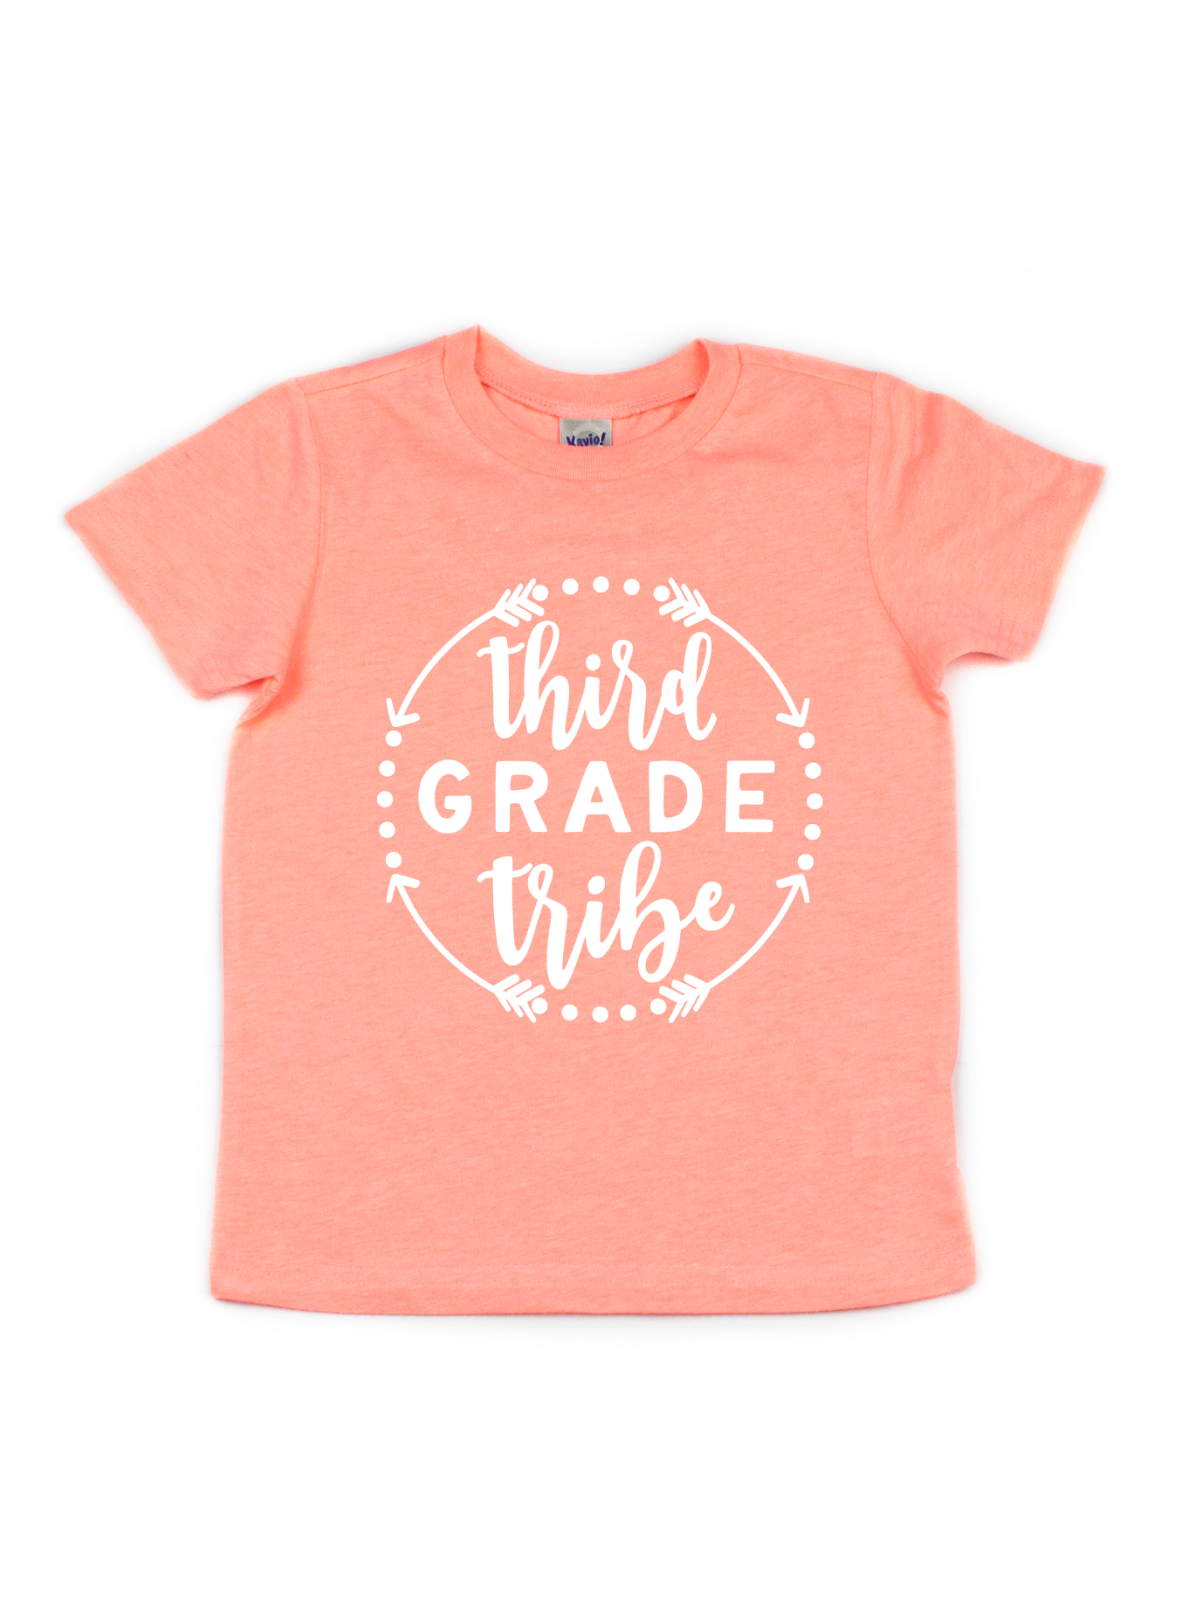 3rd grade tribe back to school tee